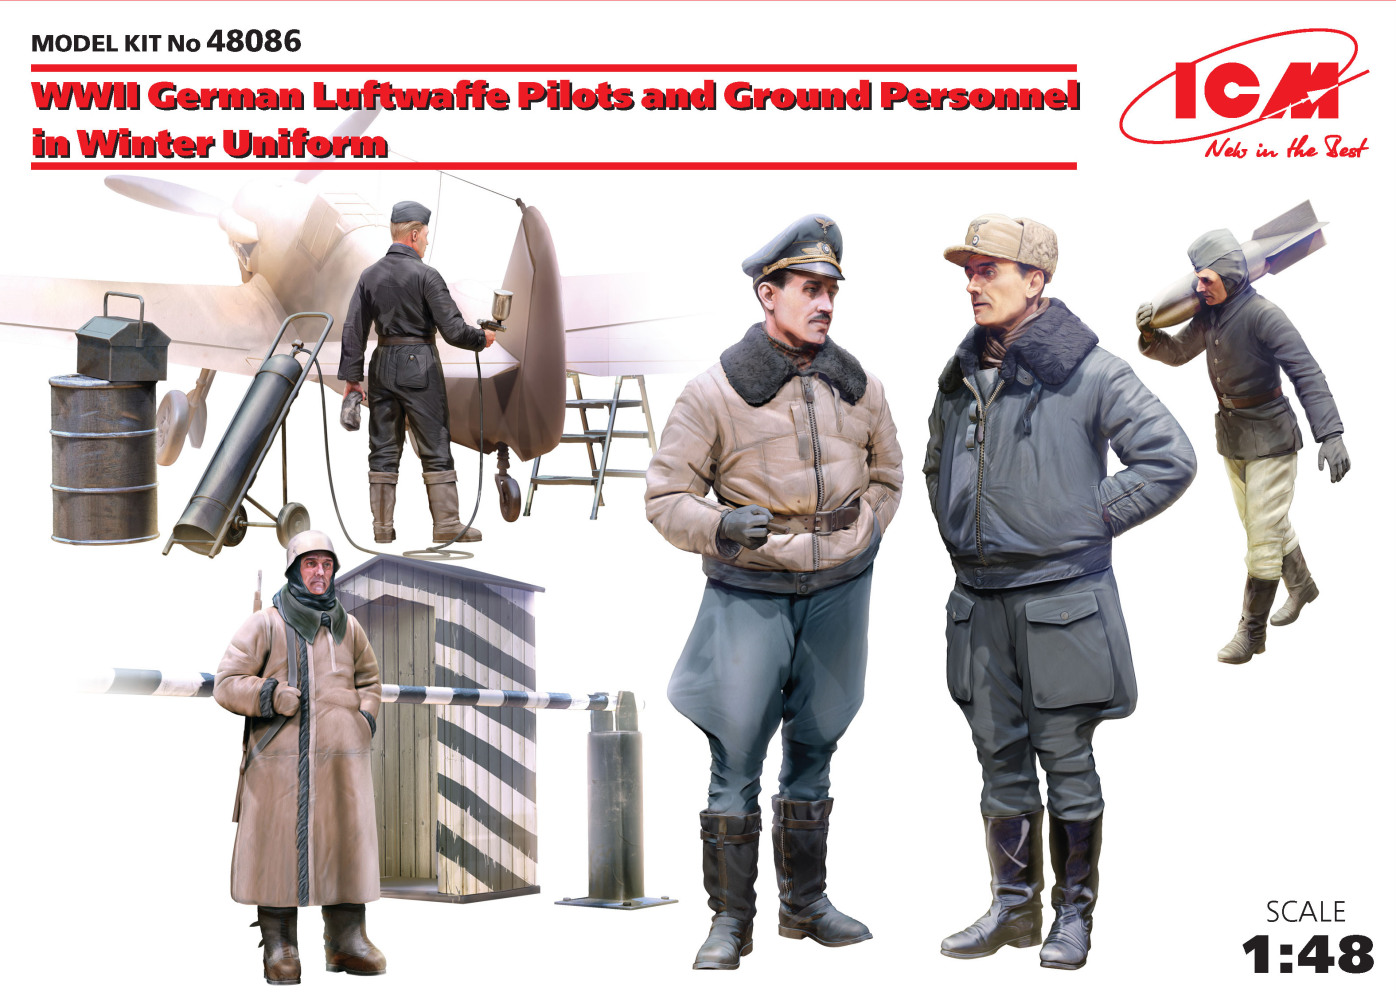 WWII German Luftwaffe Pilots and Ground Personnel in Winter Uniform